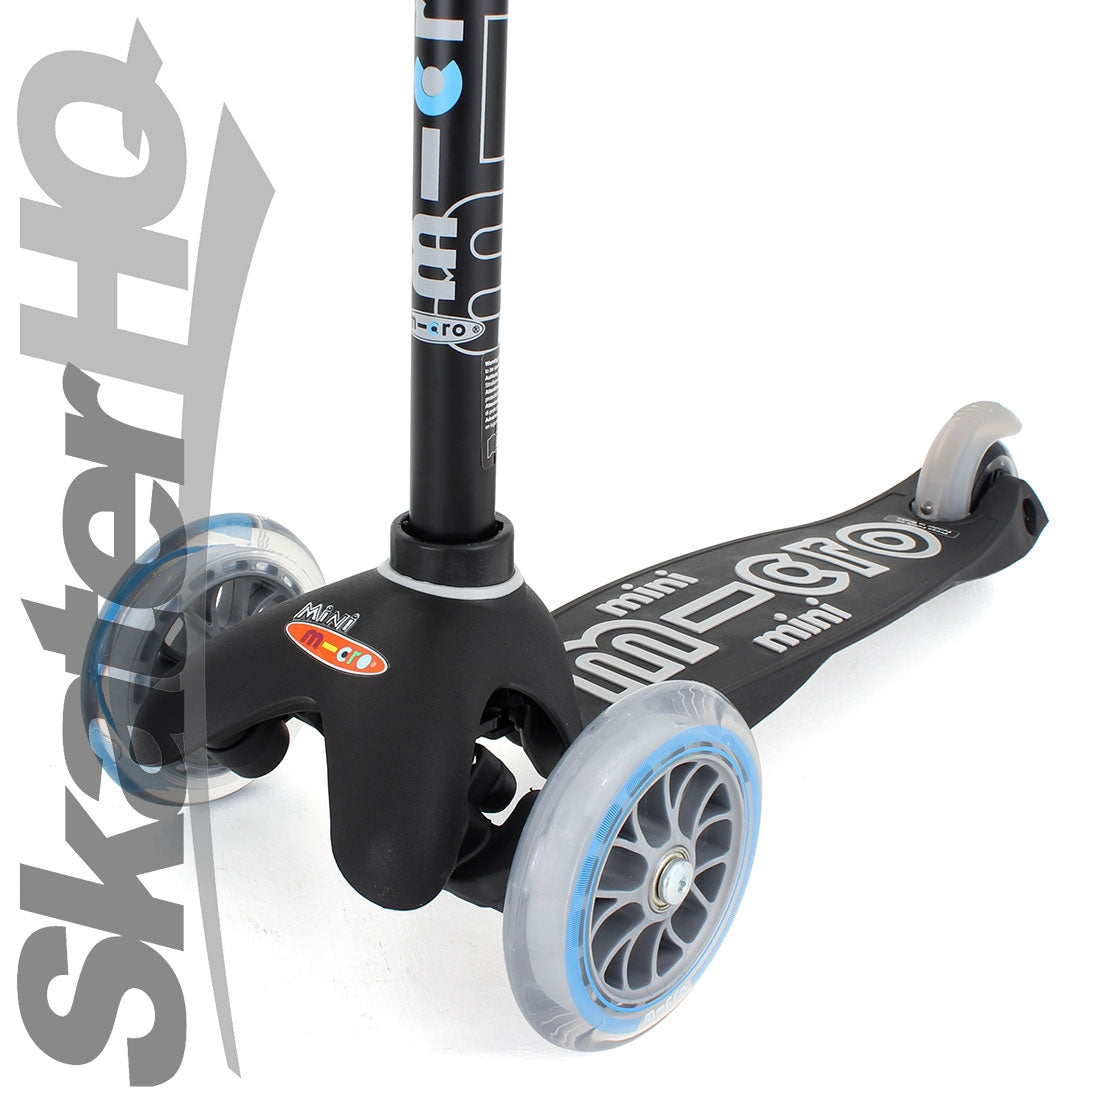 Micro Mini Deluxe Scooter - Black Scooter Completes Rec